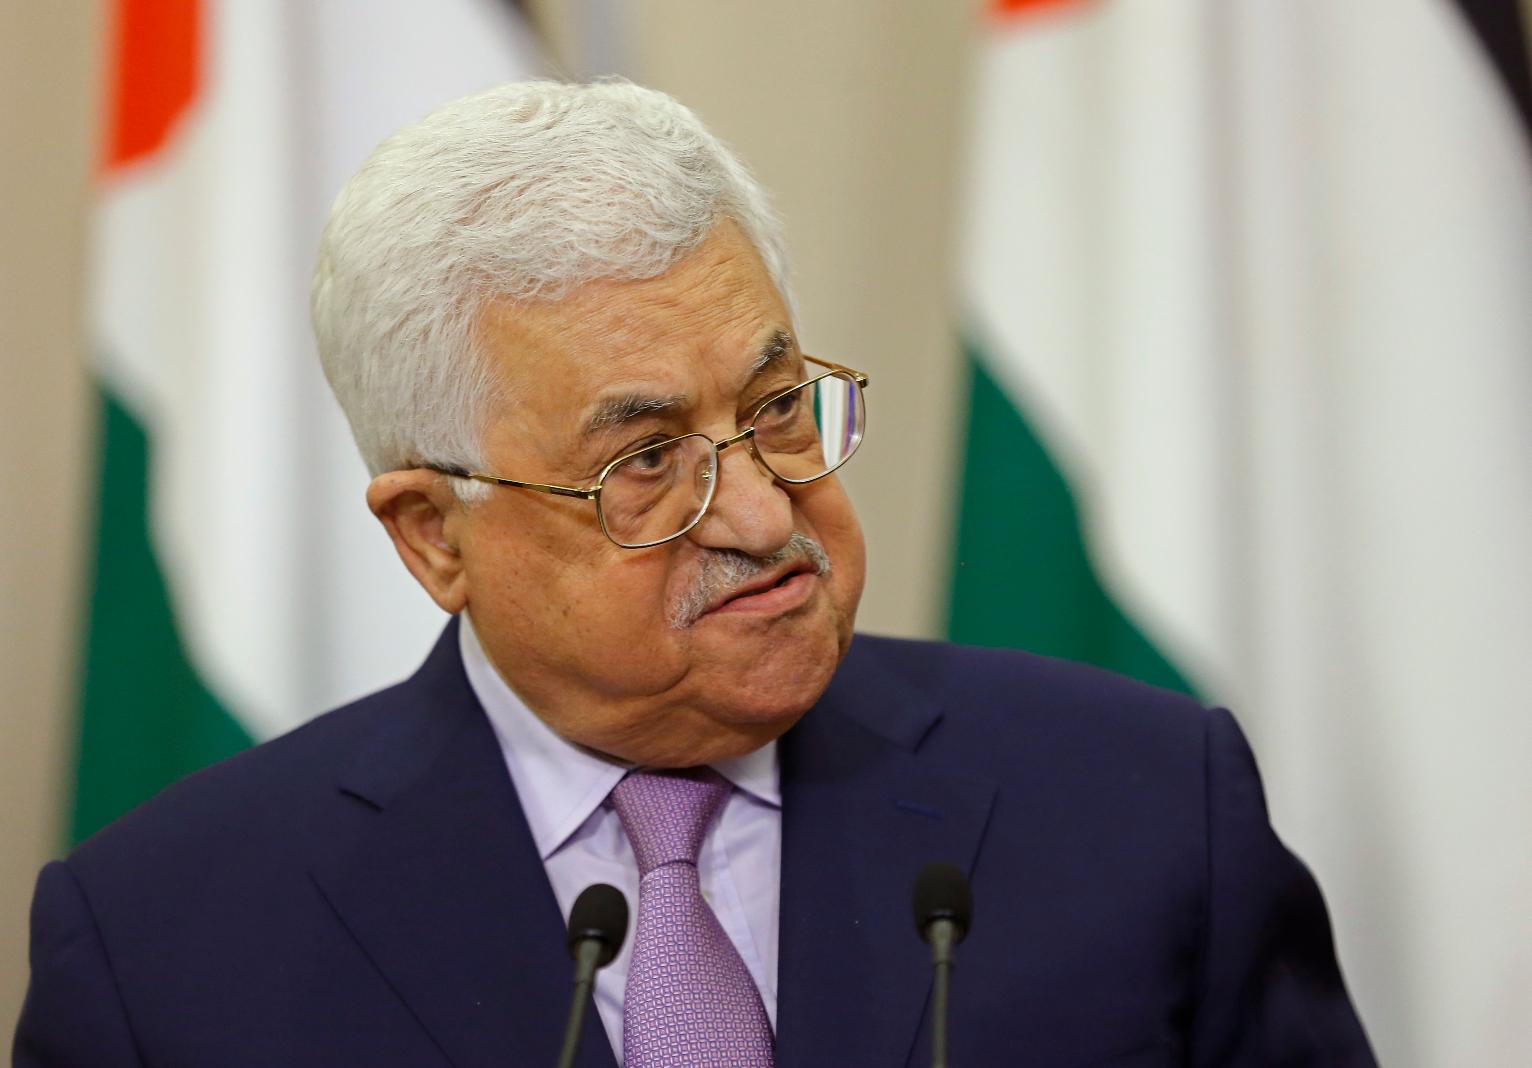 Palestinian Leader Abbas in Hospital for Routine Tests